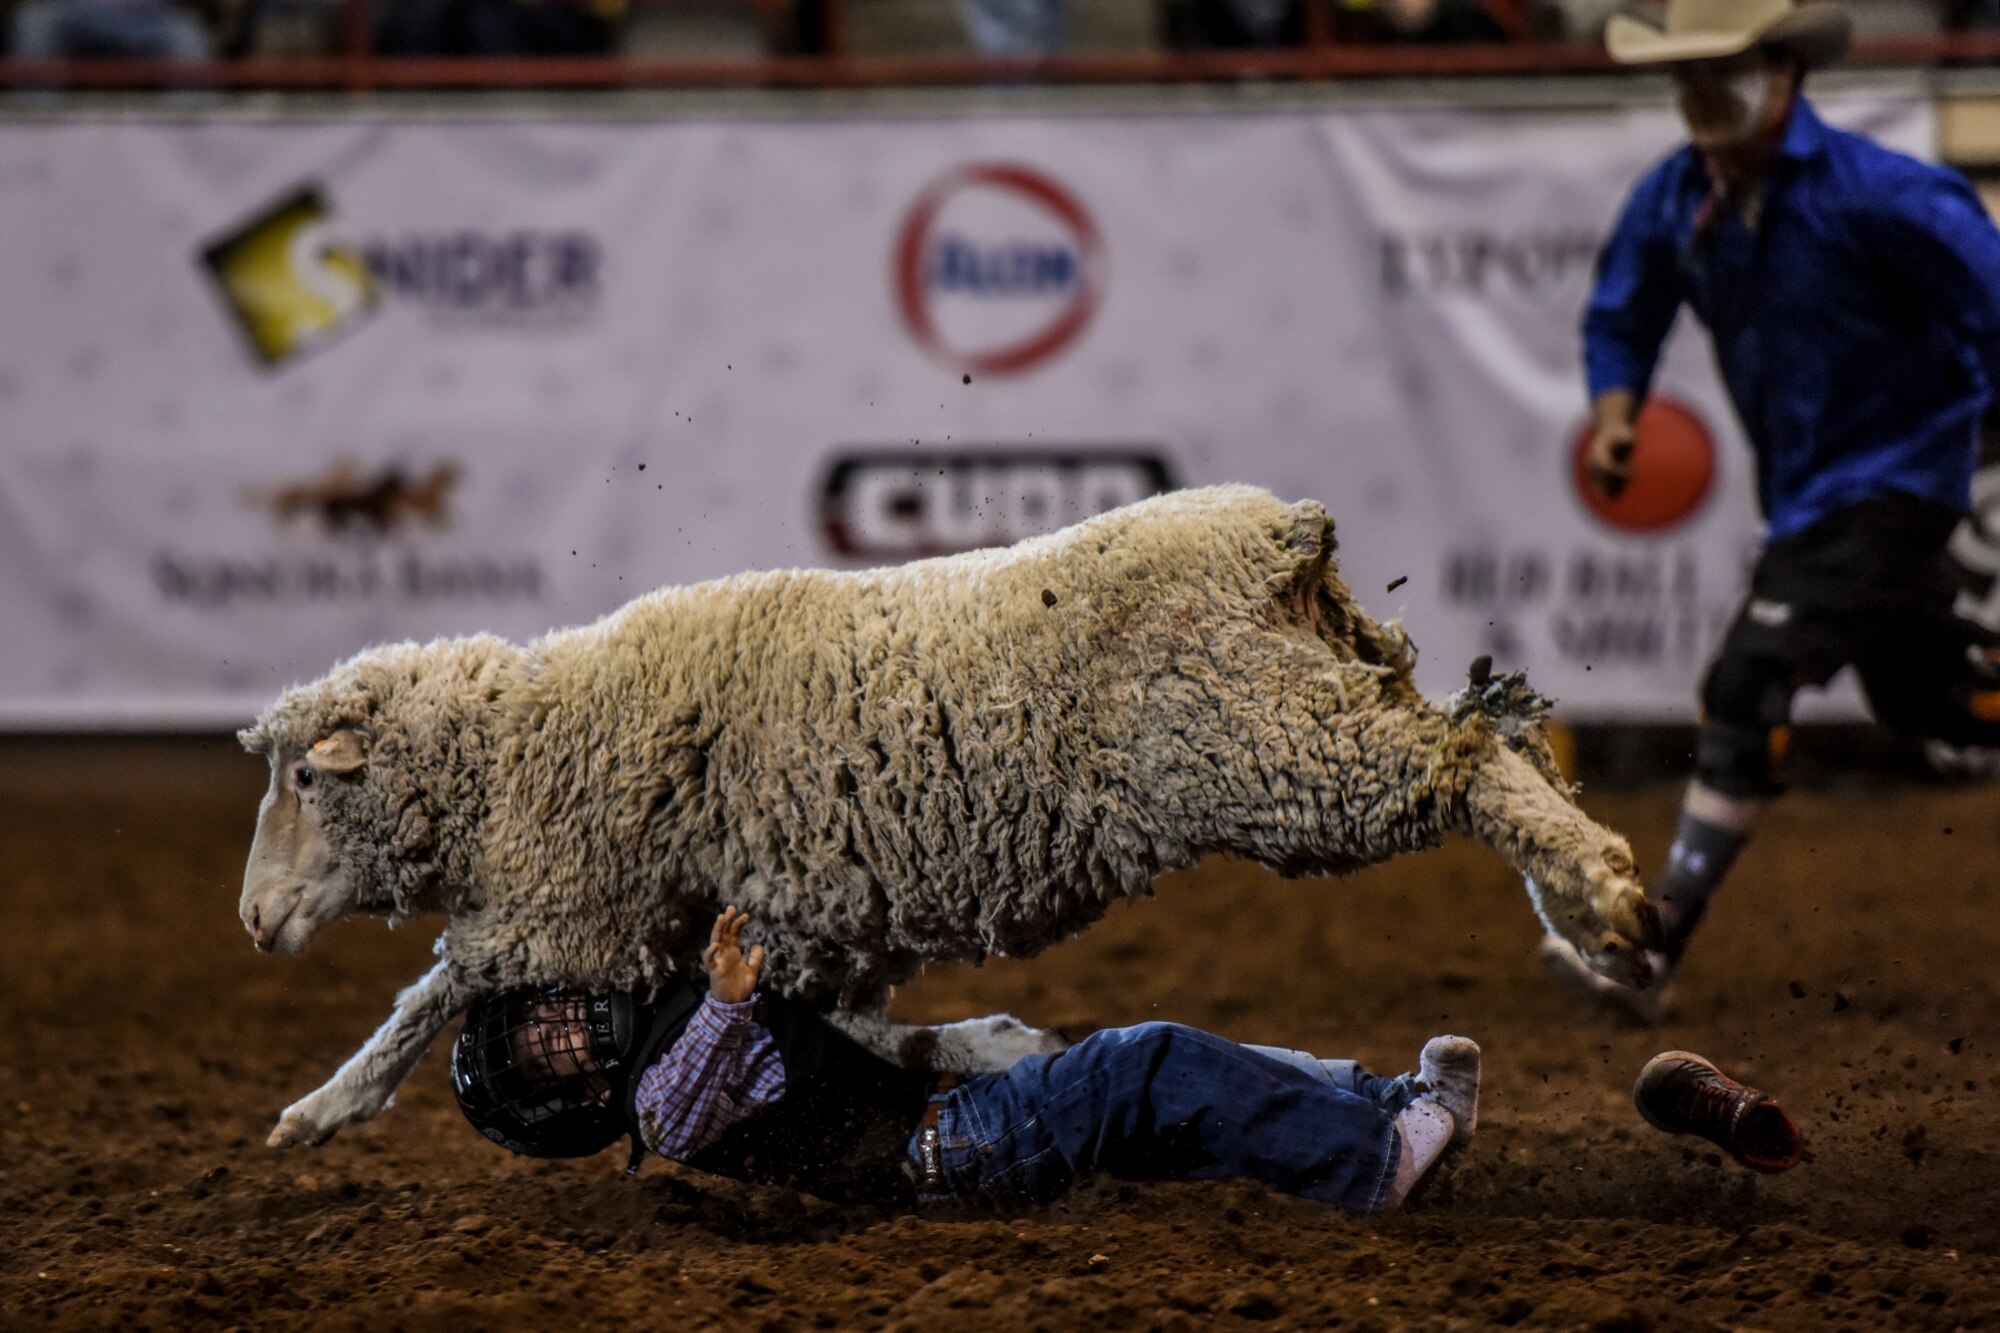 A young local resident loses a shoe after falling off a sheep during the Mutton Bustin’ event as part of the 84th annual San Angelo Stock Show and Rodeo at Foster Communications Coliseum in San Angelo, Texas, Feb. 17, 2016. Participants for the event come from local and surrounding area elementary schools. (U.S. Air Force photo by Senior Airman Devin Boyer/Released)